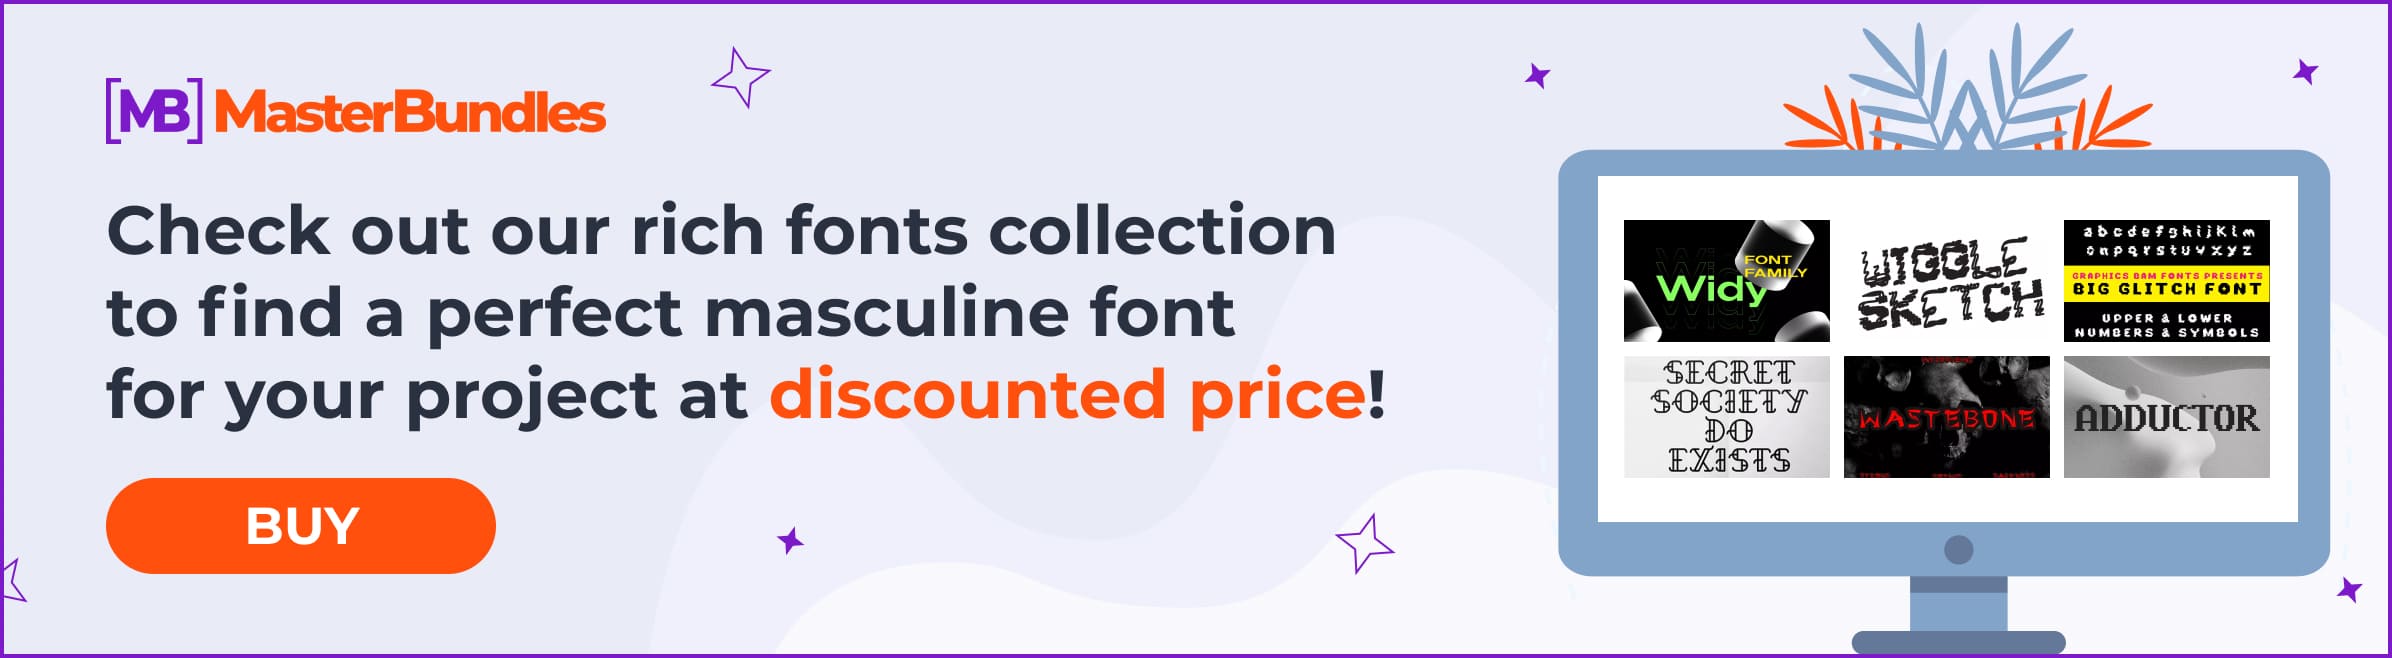 Banner for masculine fonts with discount.